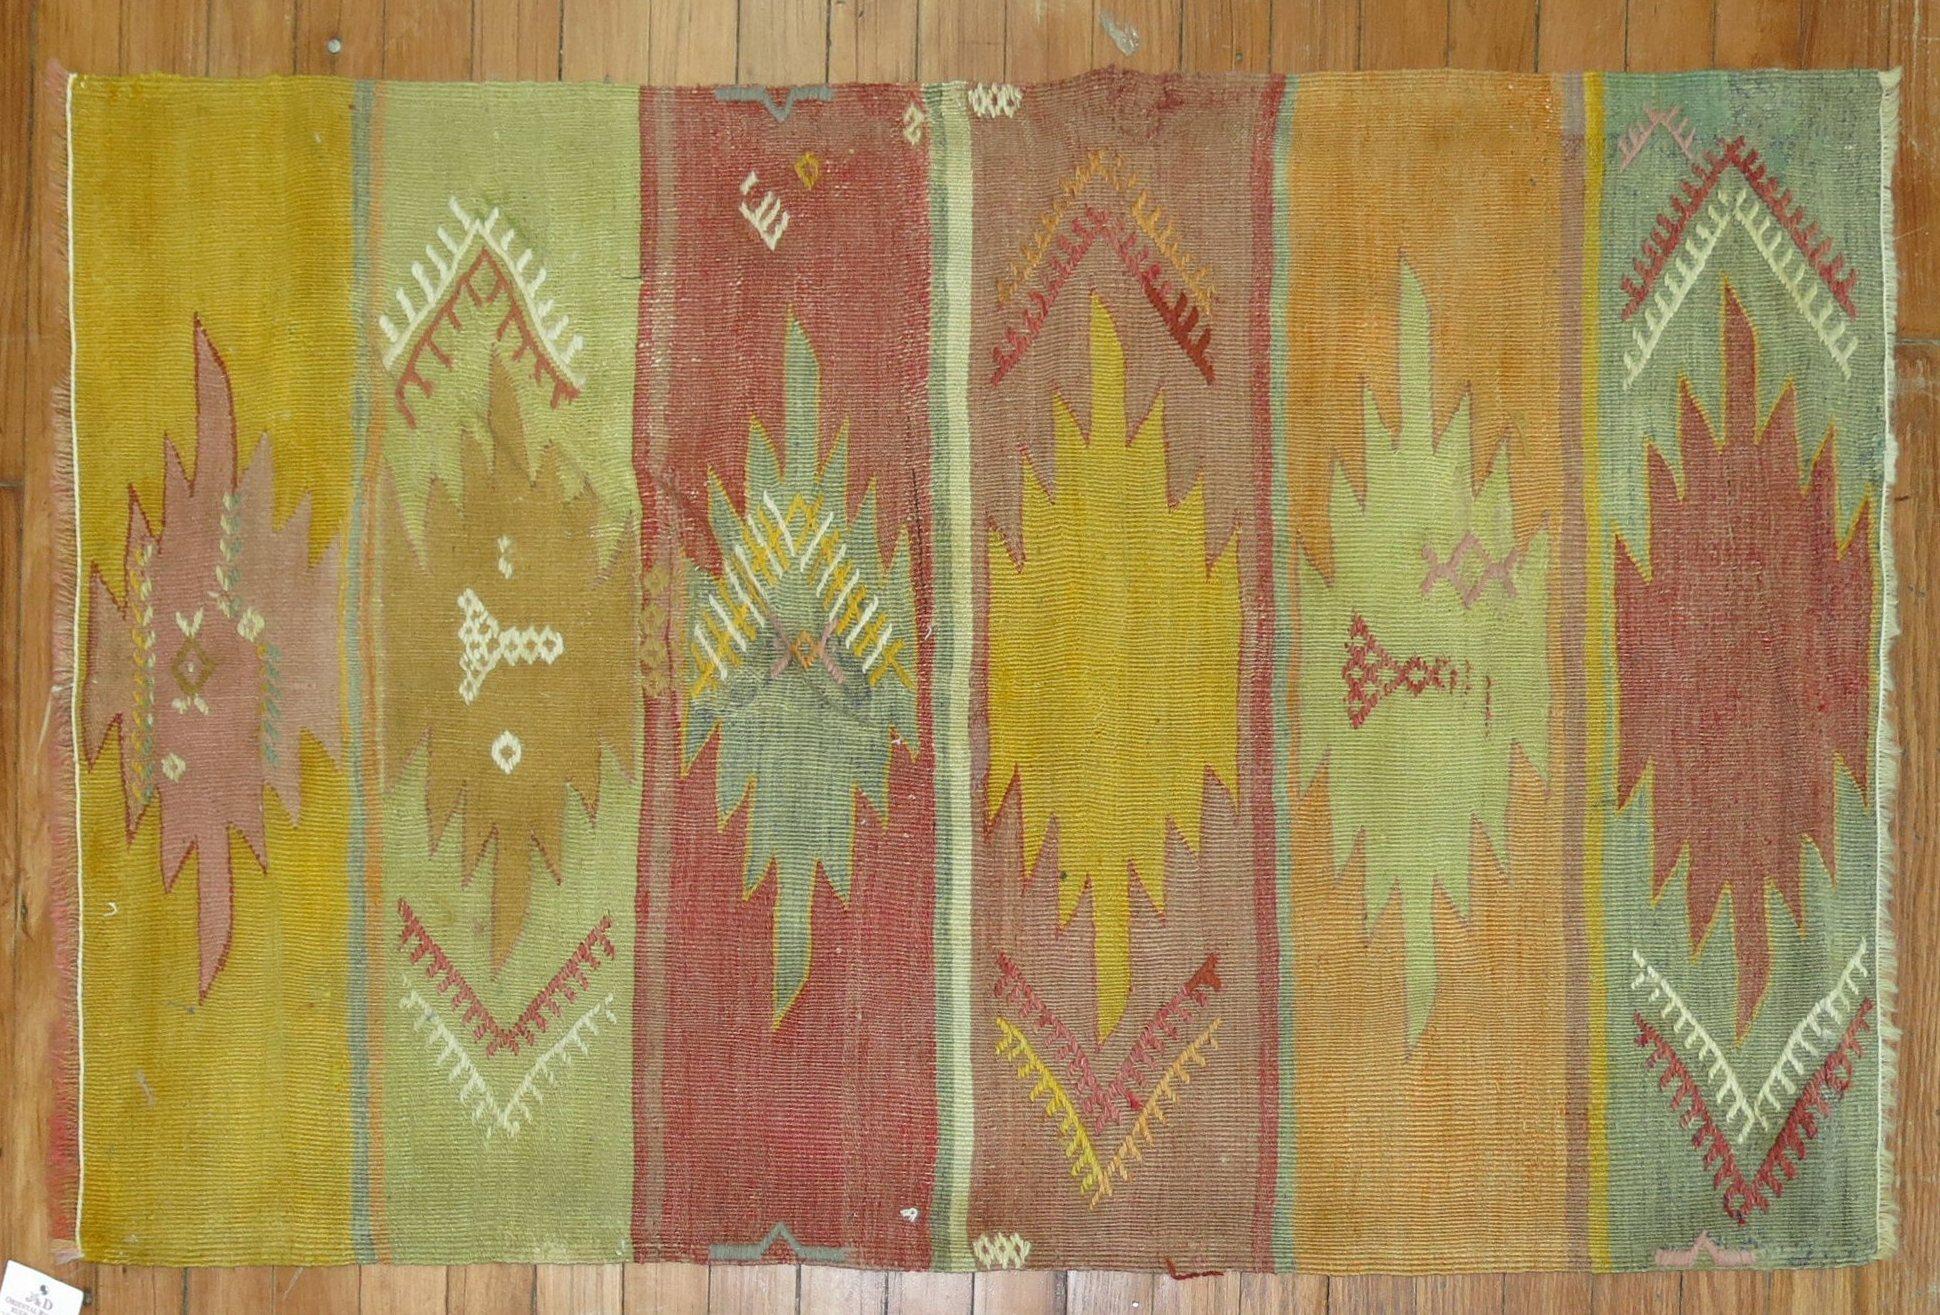 Colorful early 20th century Turkish flat-weave Kilim.